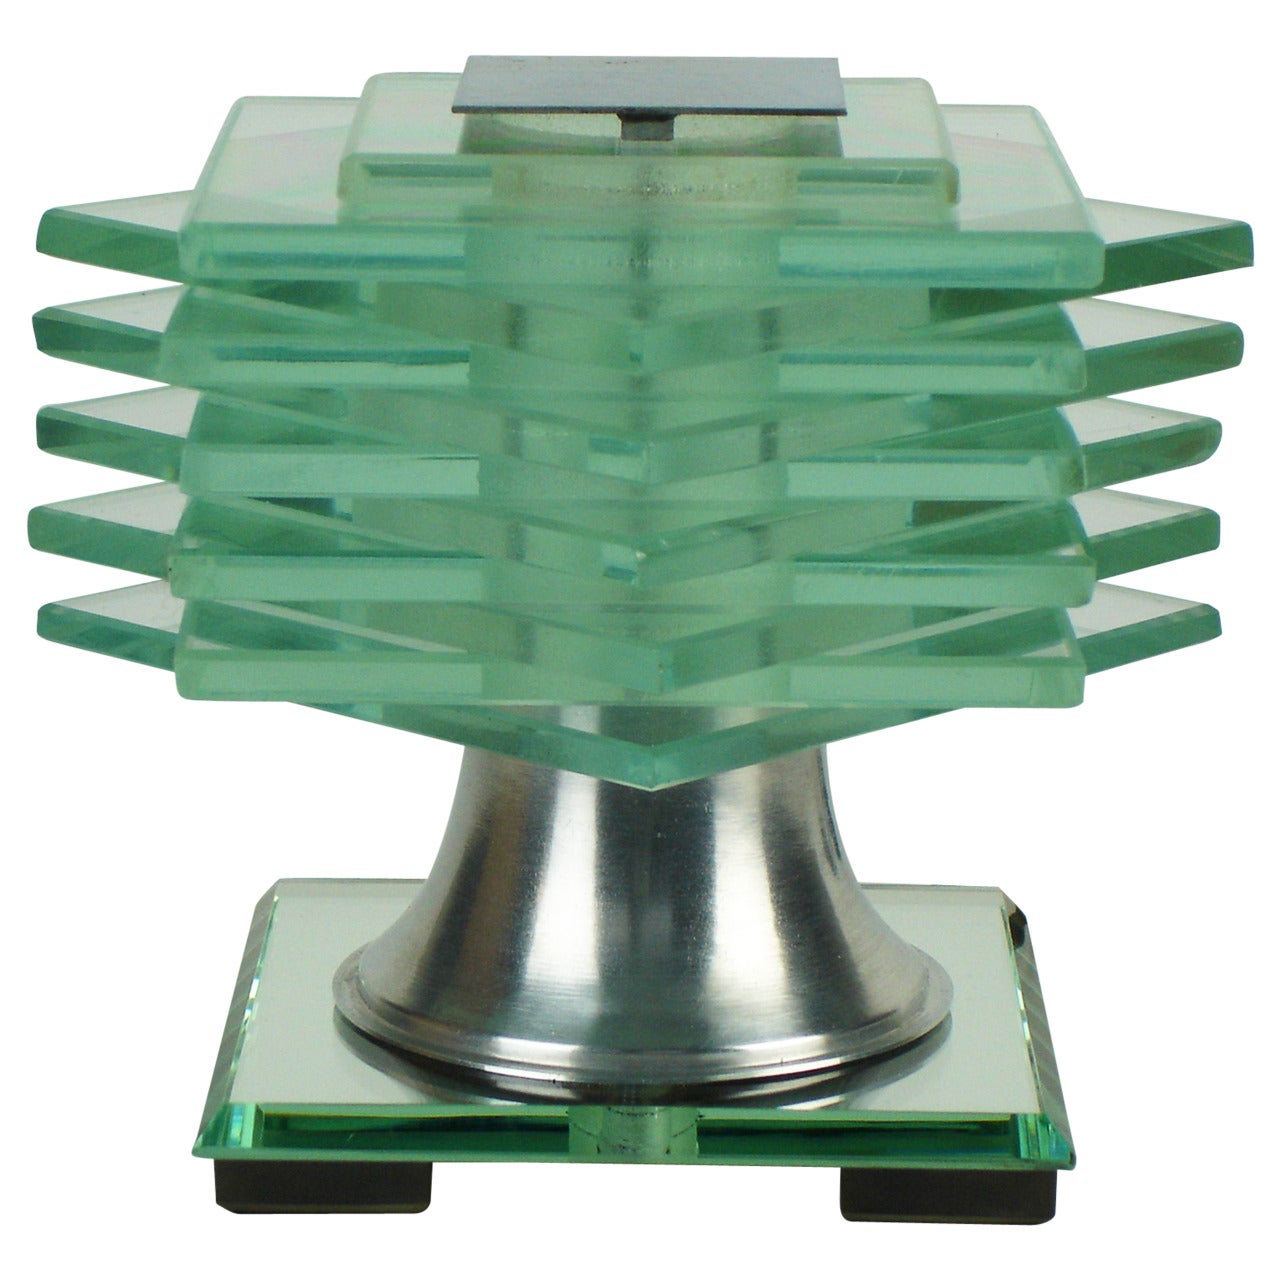 "Art Deco" Table Lamp by Desny